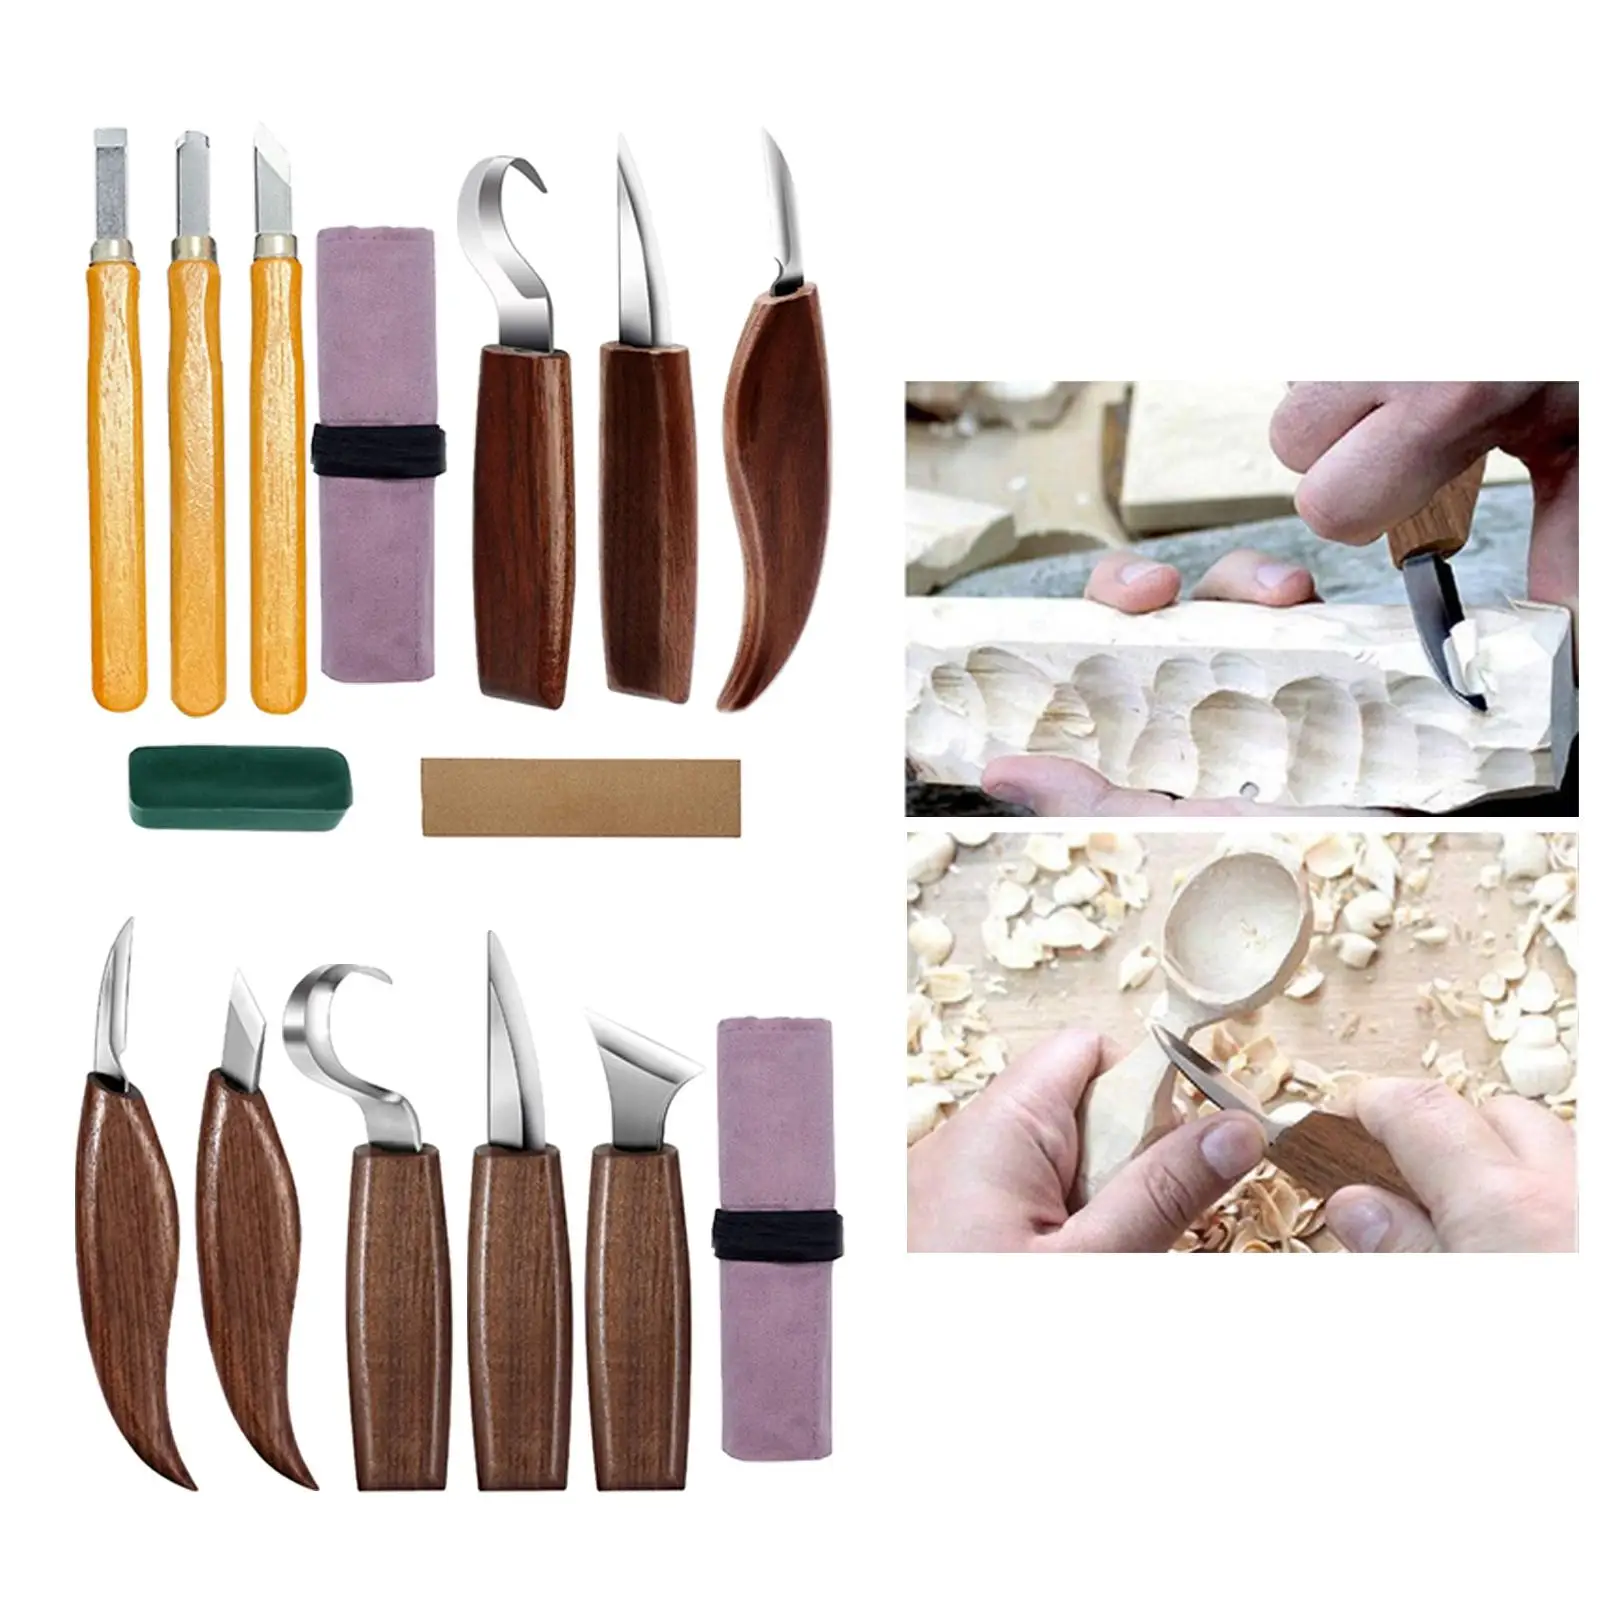 Premium Wood Carving Tools Set Woodworking Cutter Hook Carving Knife Hand Tool Crafts Detail Cutter DIY Carpentry Kids Adults